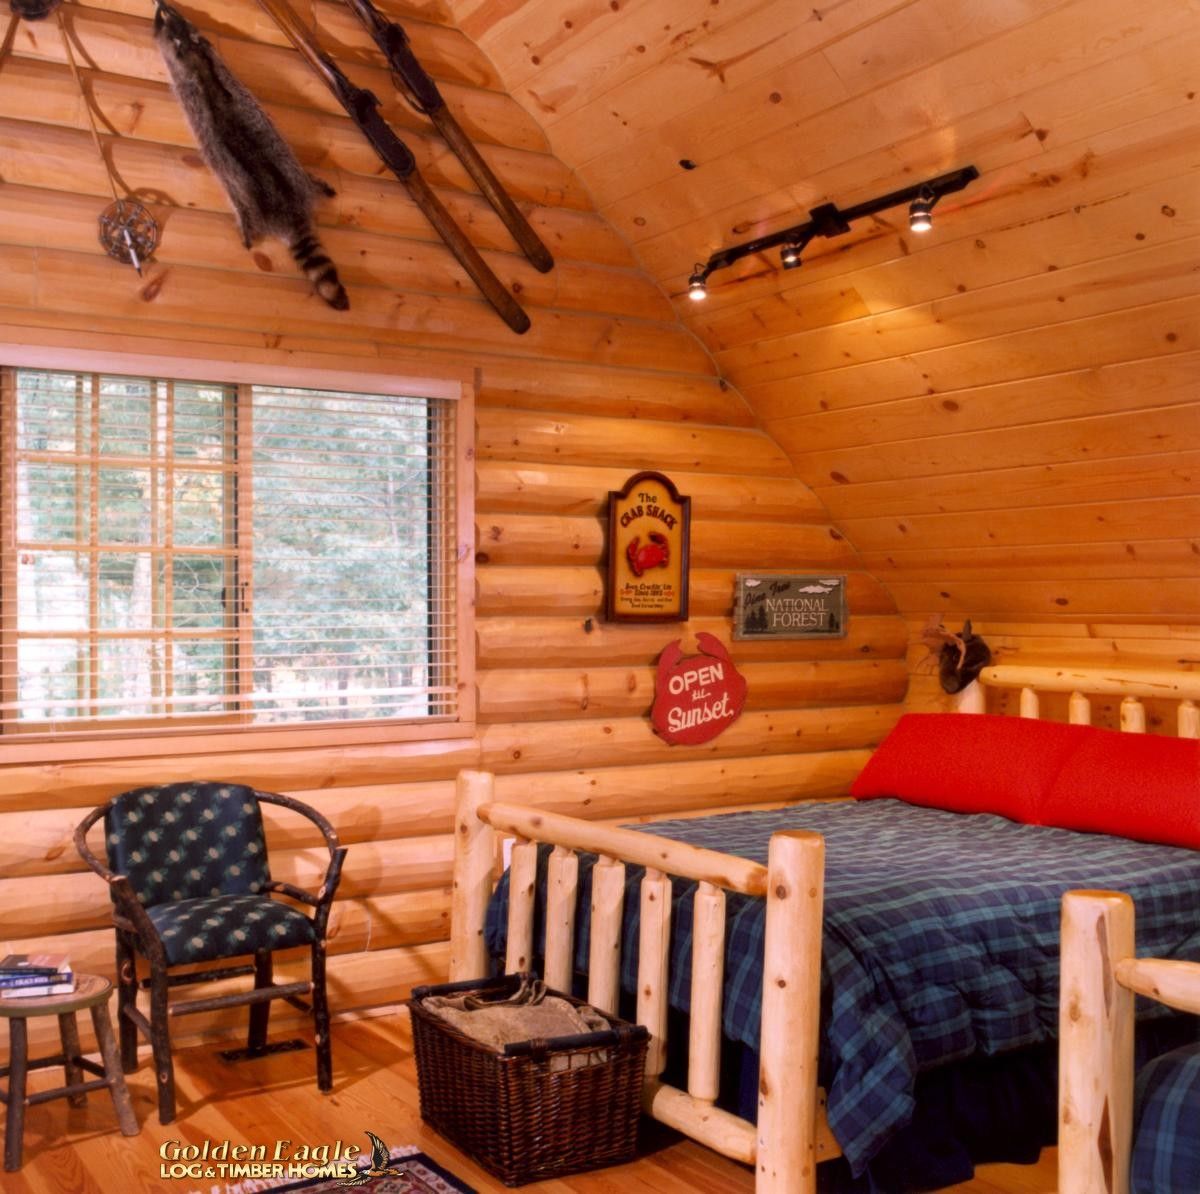 blue and red bedding on bed in log cabin